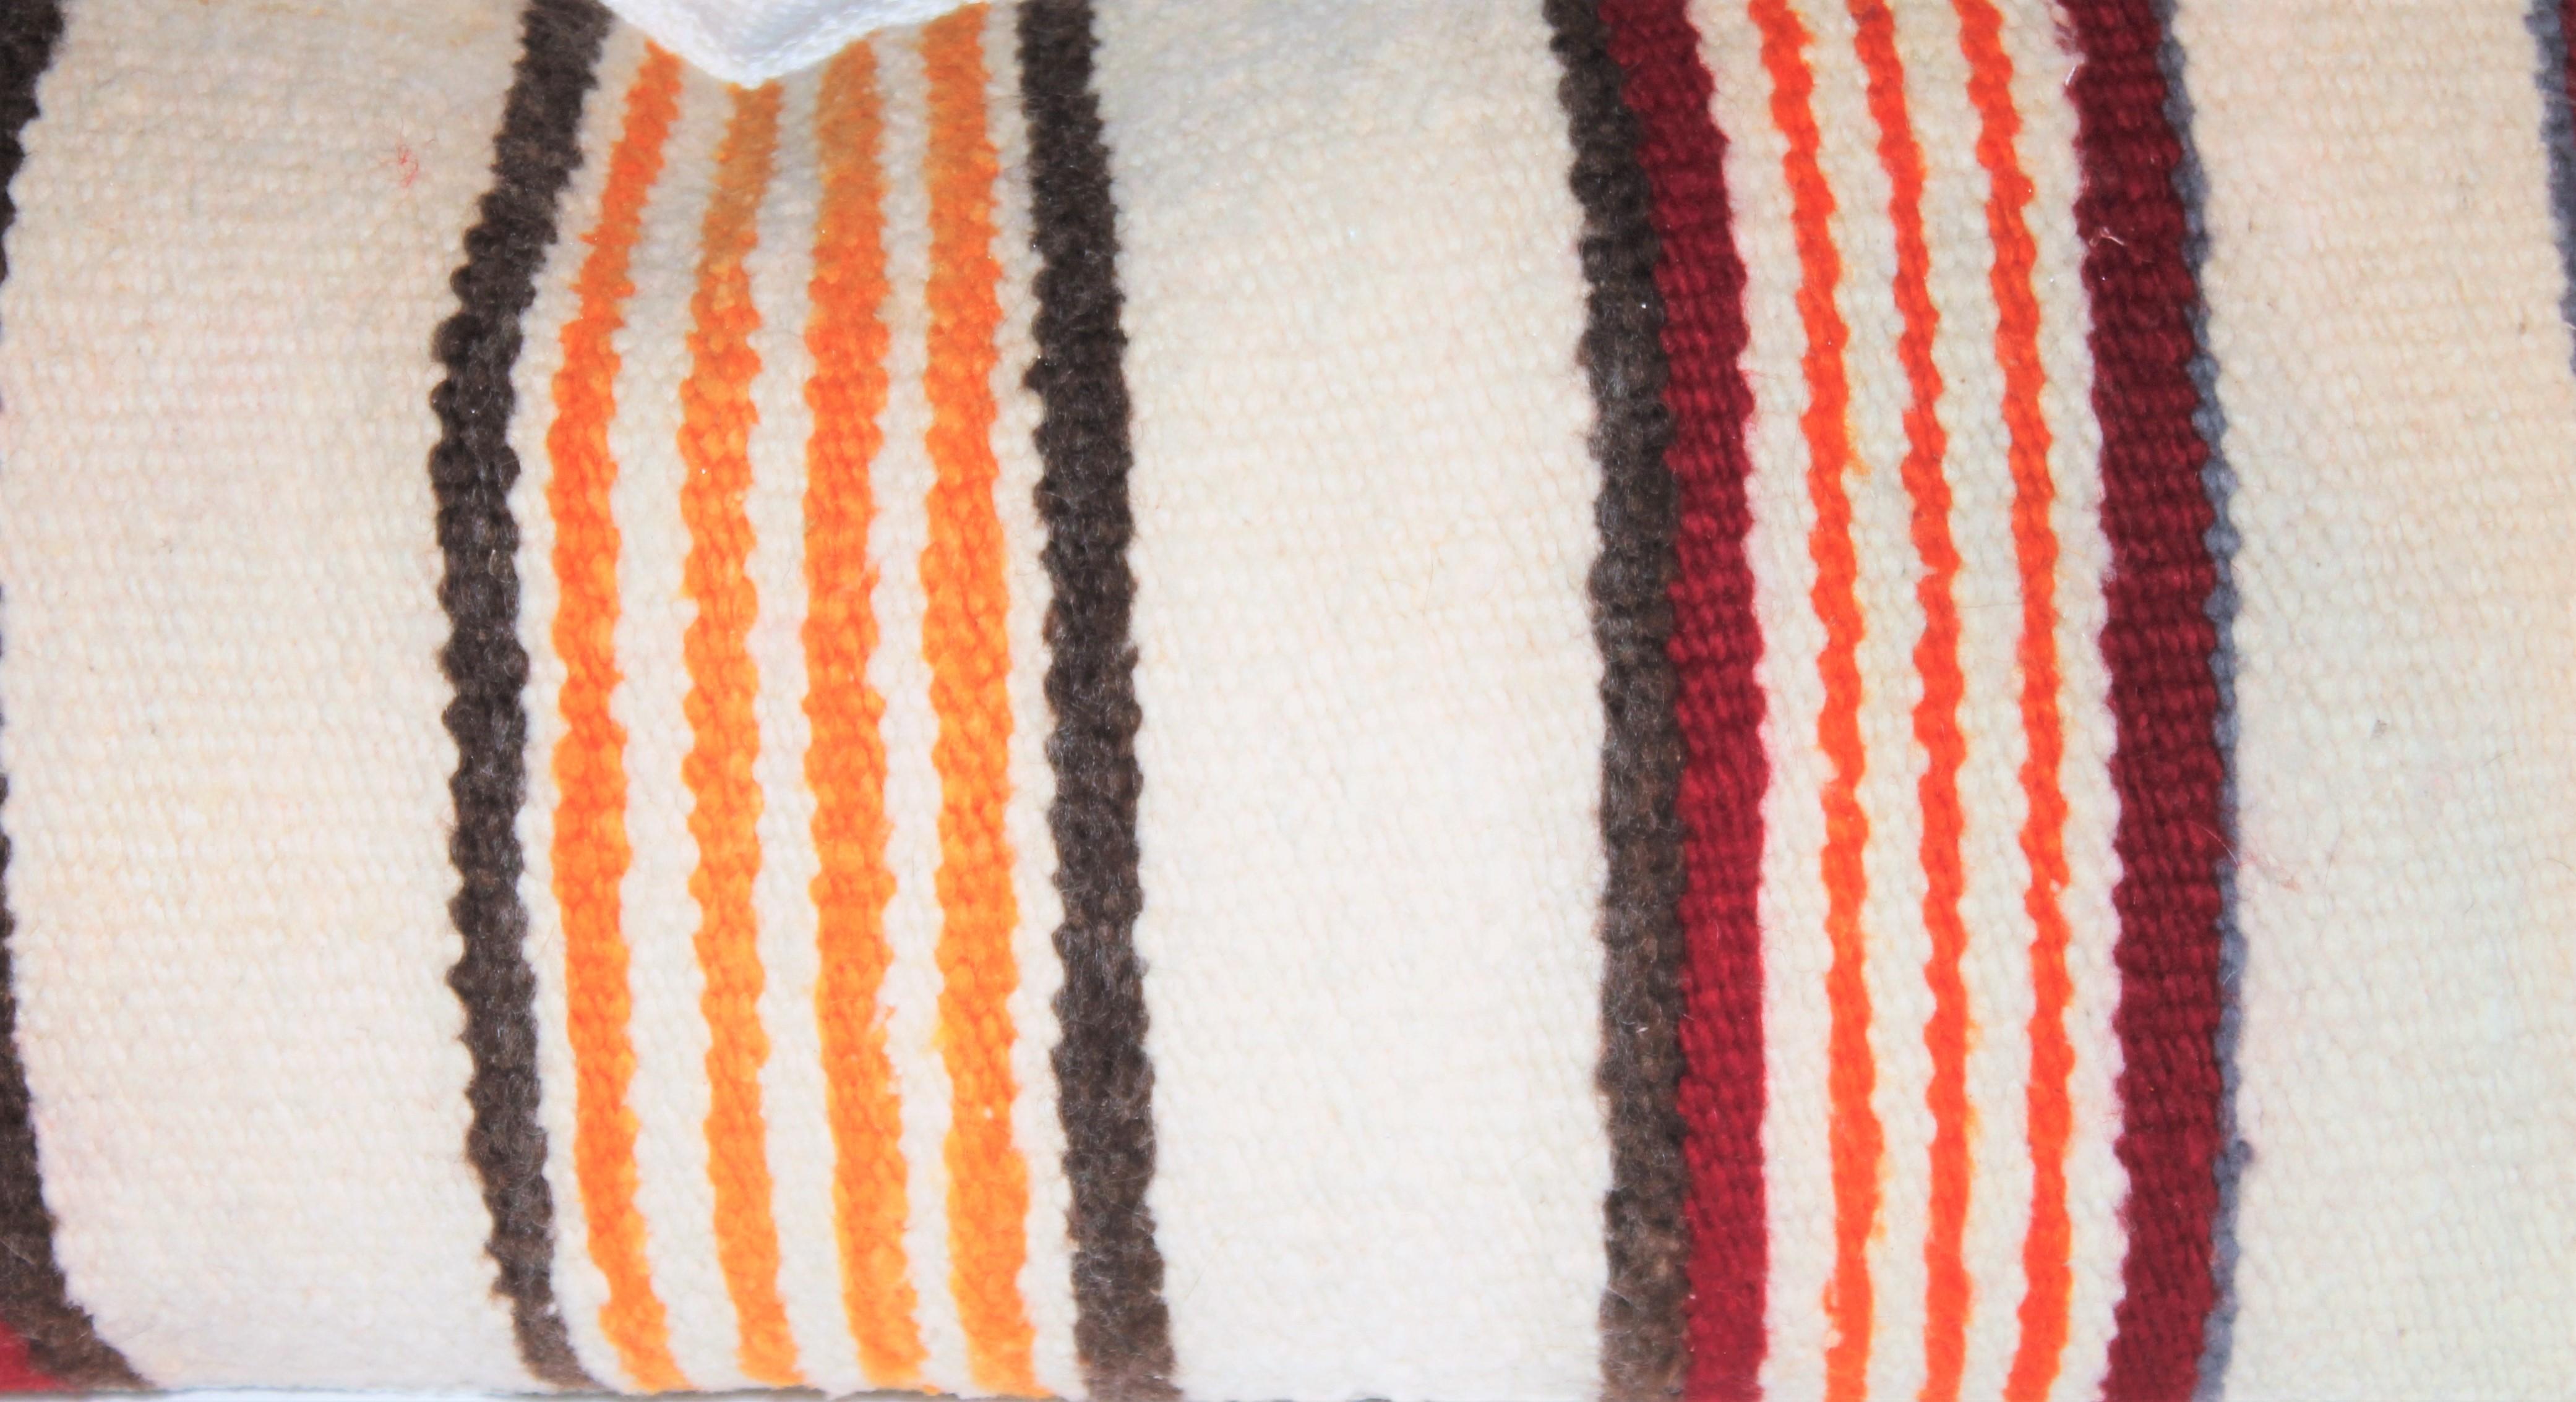 Pair of Navajo Striped bolster pillows. Feather and down inserts and zippered casing.